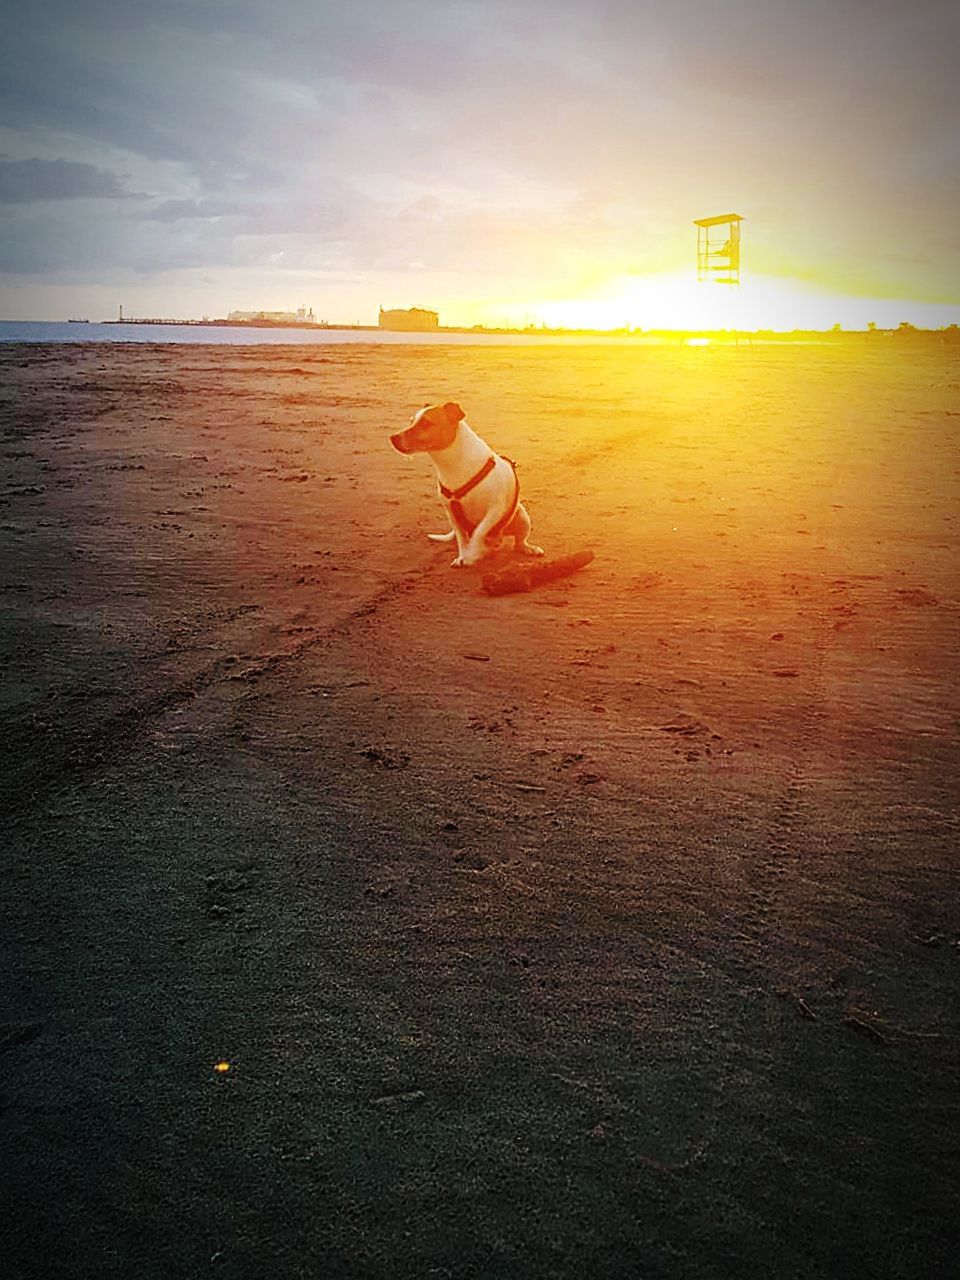 beach, sky, land, canine, pets, sand, dog, one animal, domestic, sunset, animal themes, mammal, domestic animals, animal, nature, vertebrate, sea, full length, real people, cloud - sky, outdoors, horizon over water